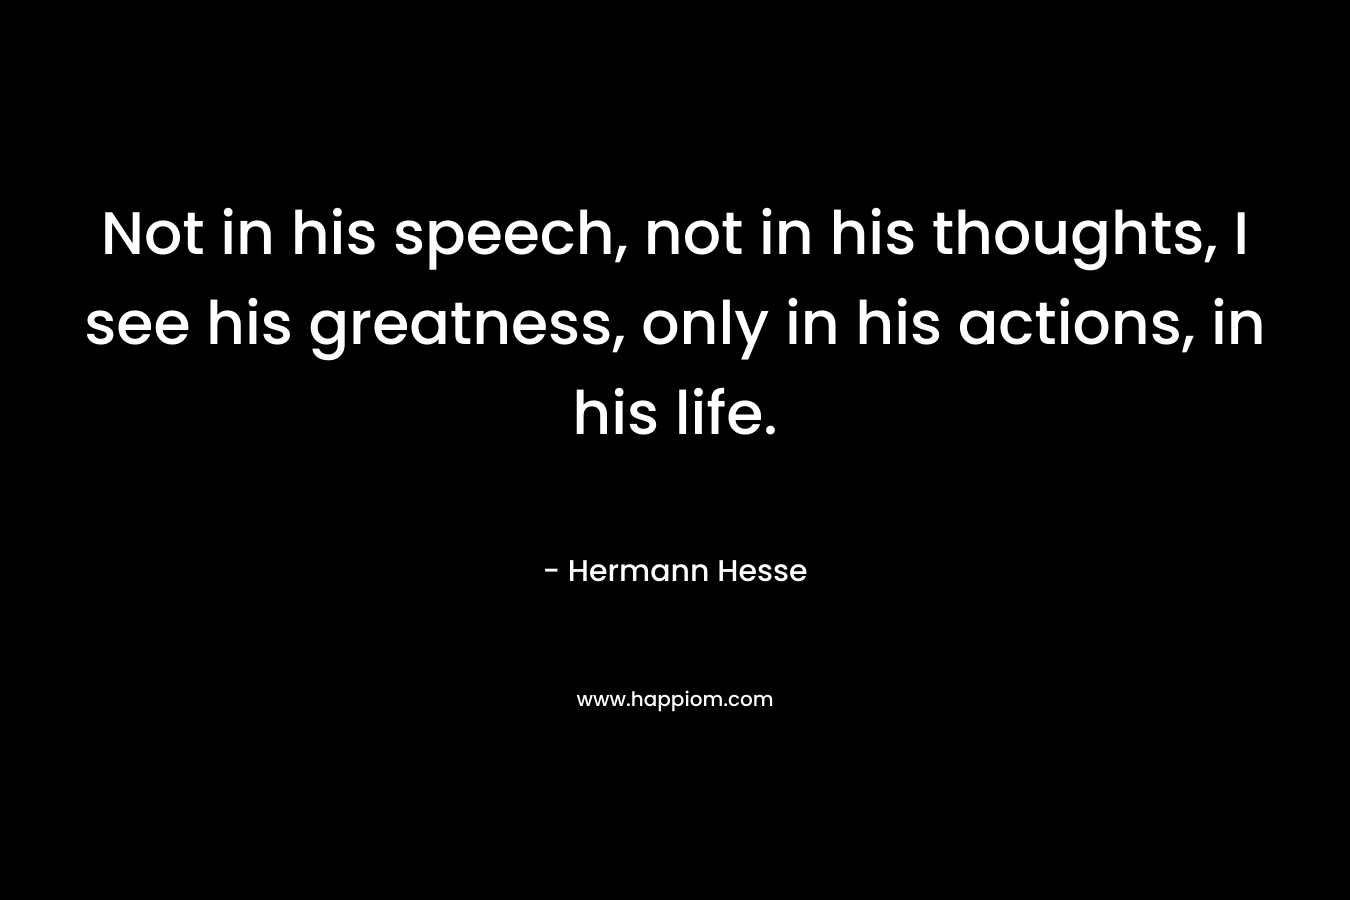 Not in his speech, not in his thoughts, I see his greatness, only in his actions, in his life.